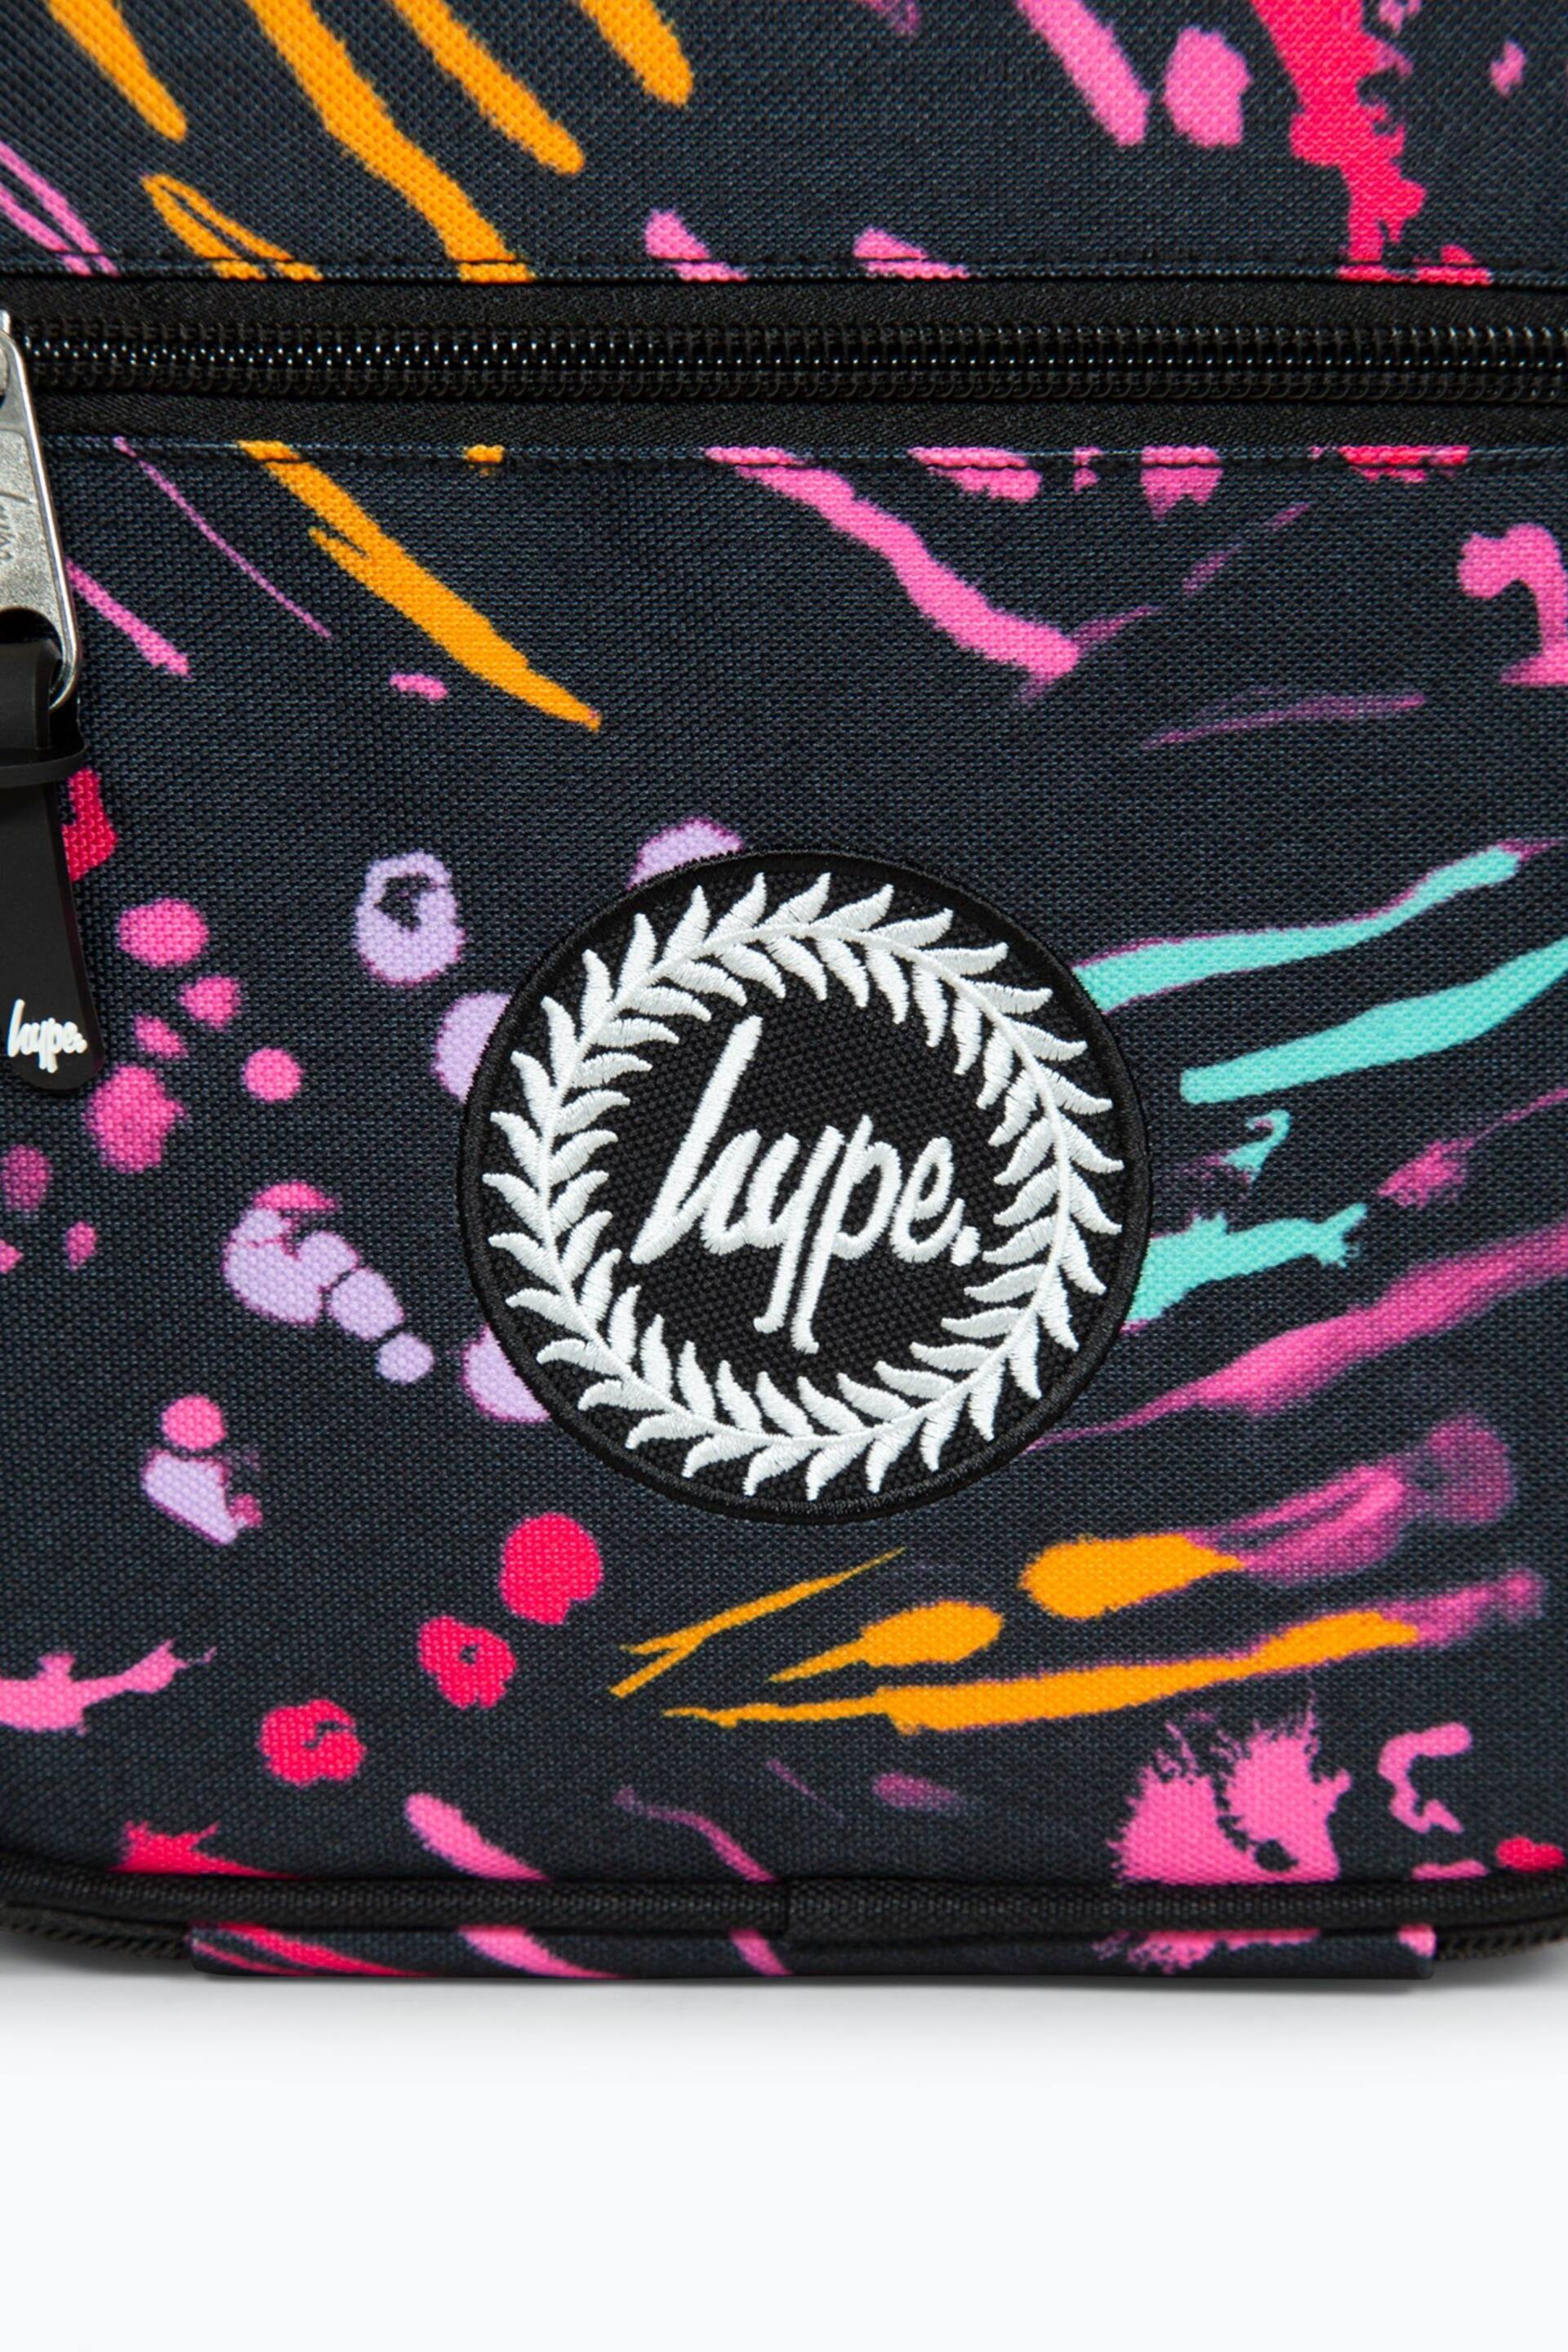 Hype. Scratches Lunch Box - Image 8 of 8